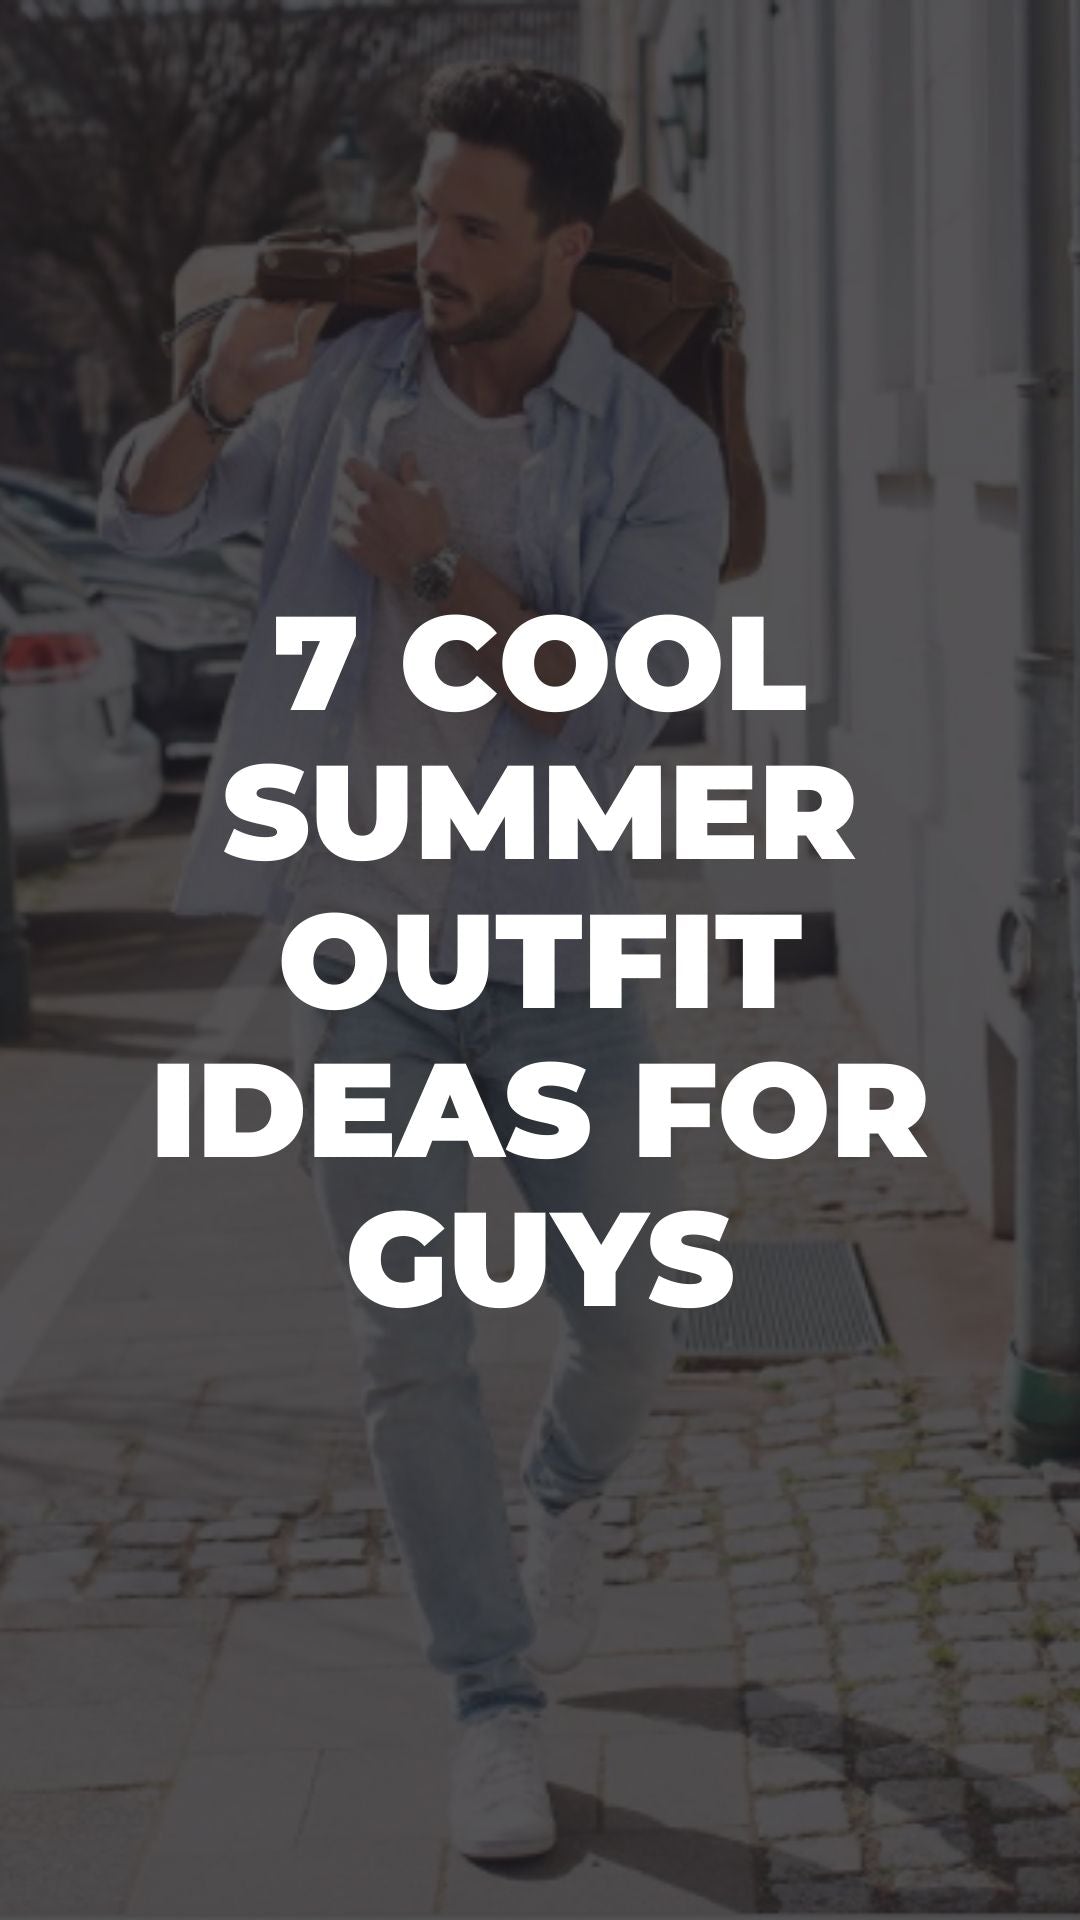 7 Cool Summer Outfit Ideas For Guys